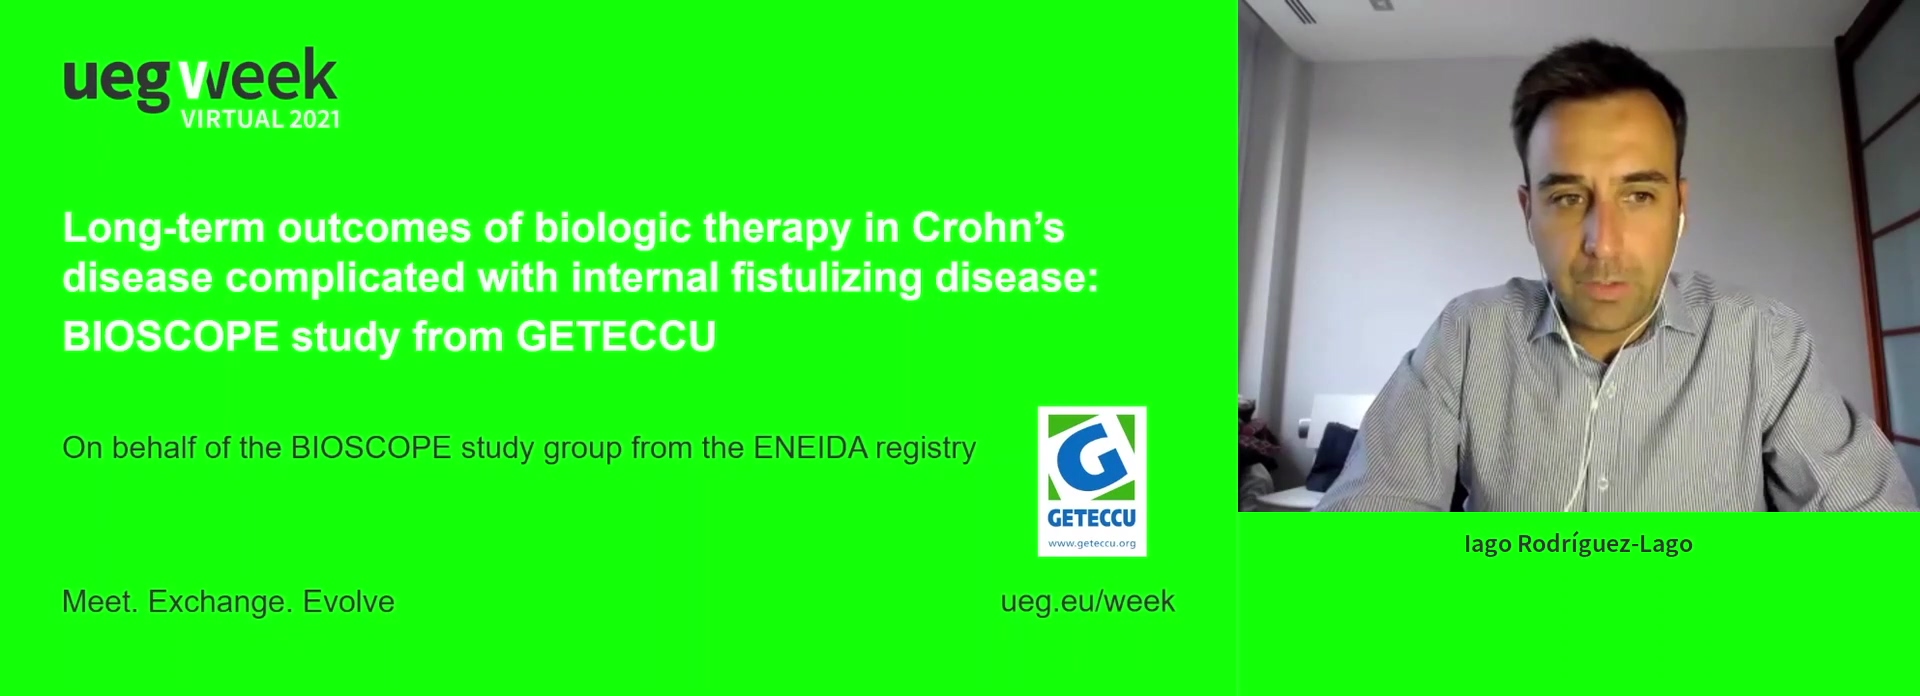 LONG-TERM OUTCOMES OF BIOLOGIC THERAPY IN CROHN’S DISEASE COMPLICATED WITH INTERNAL FISTULIZING DISEASE: BIOSCOPE STUDY FROM GETECCU